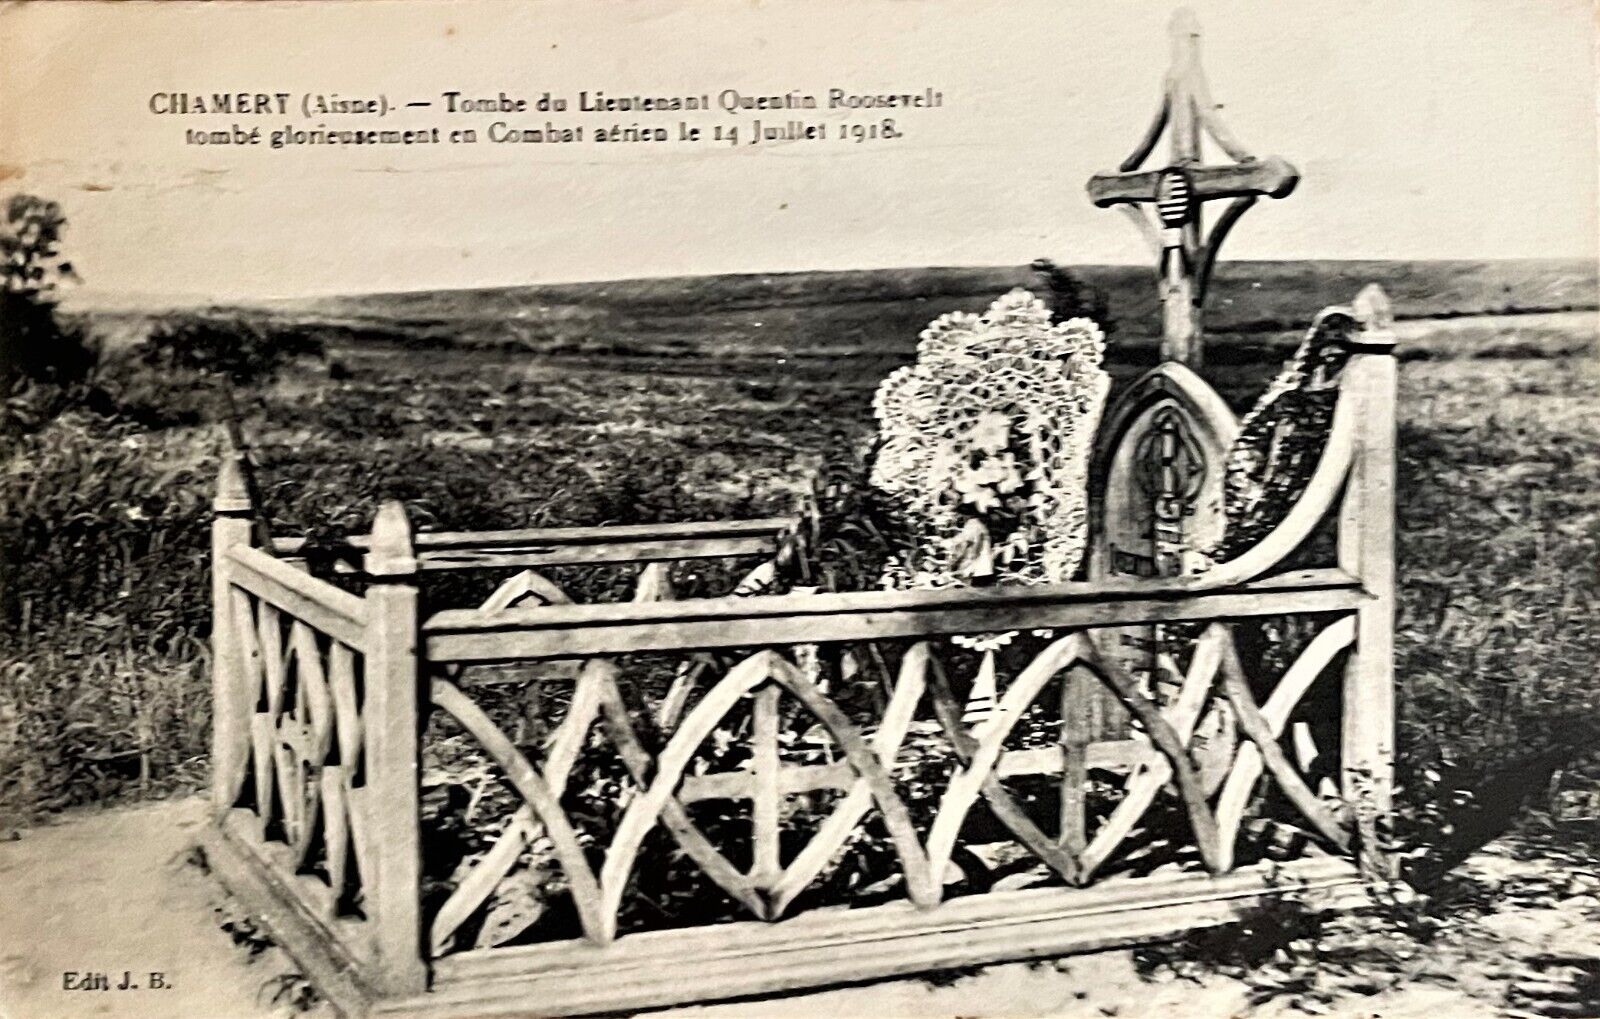 Lt. QUENTIN ROOSEVELT Tomb, Burial Plot, Chamery (Aisne); Died in Combat, Plane